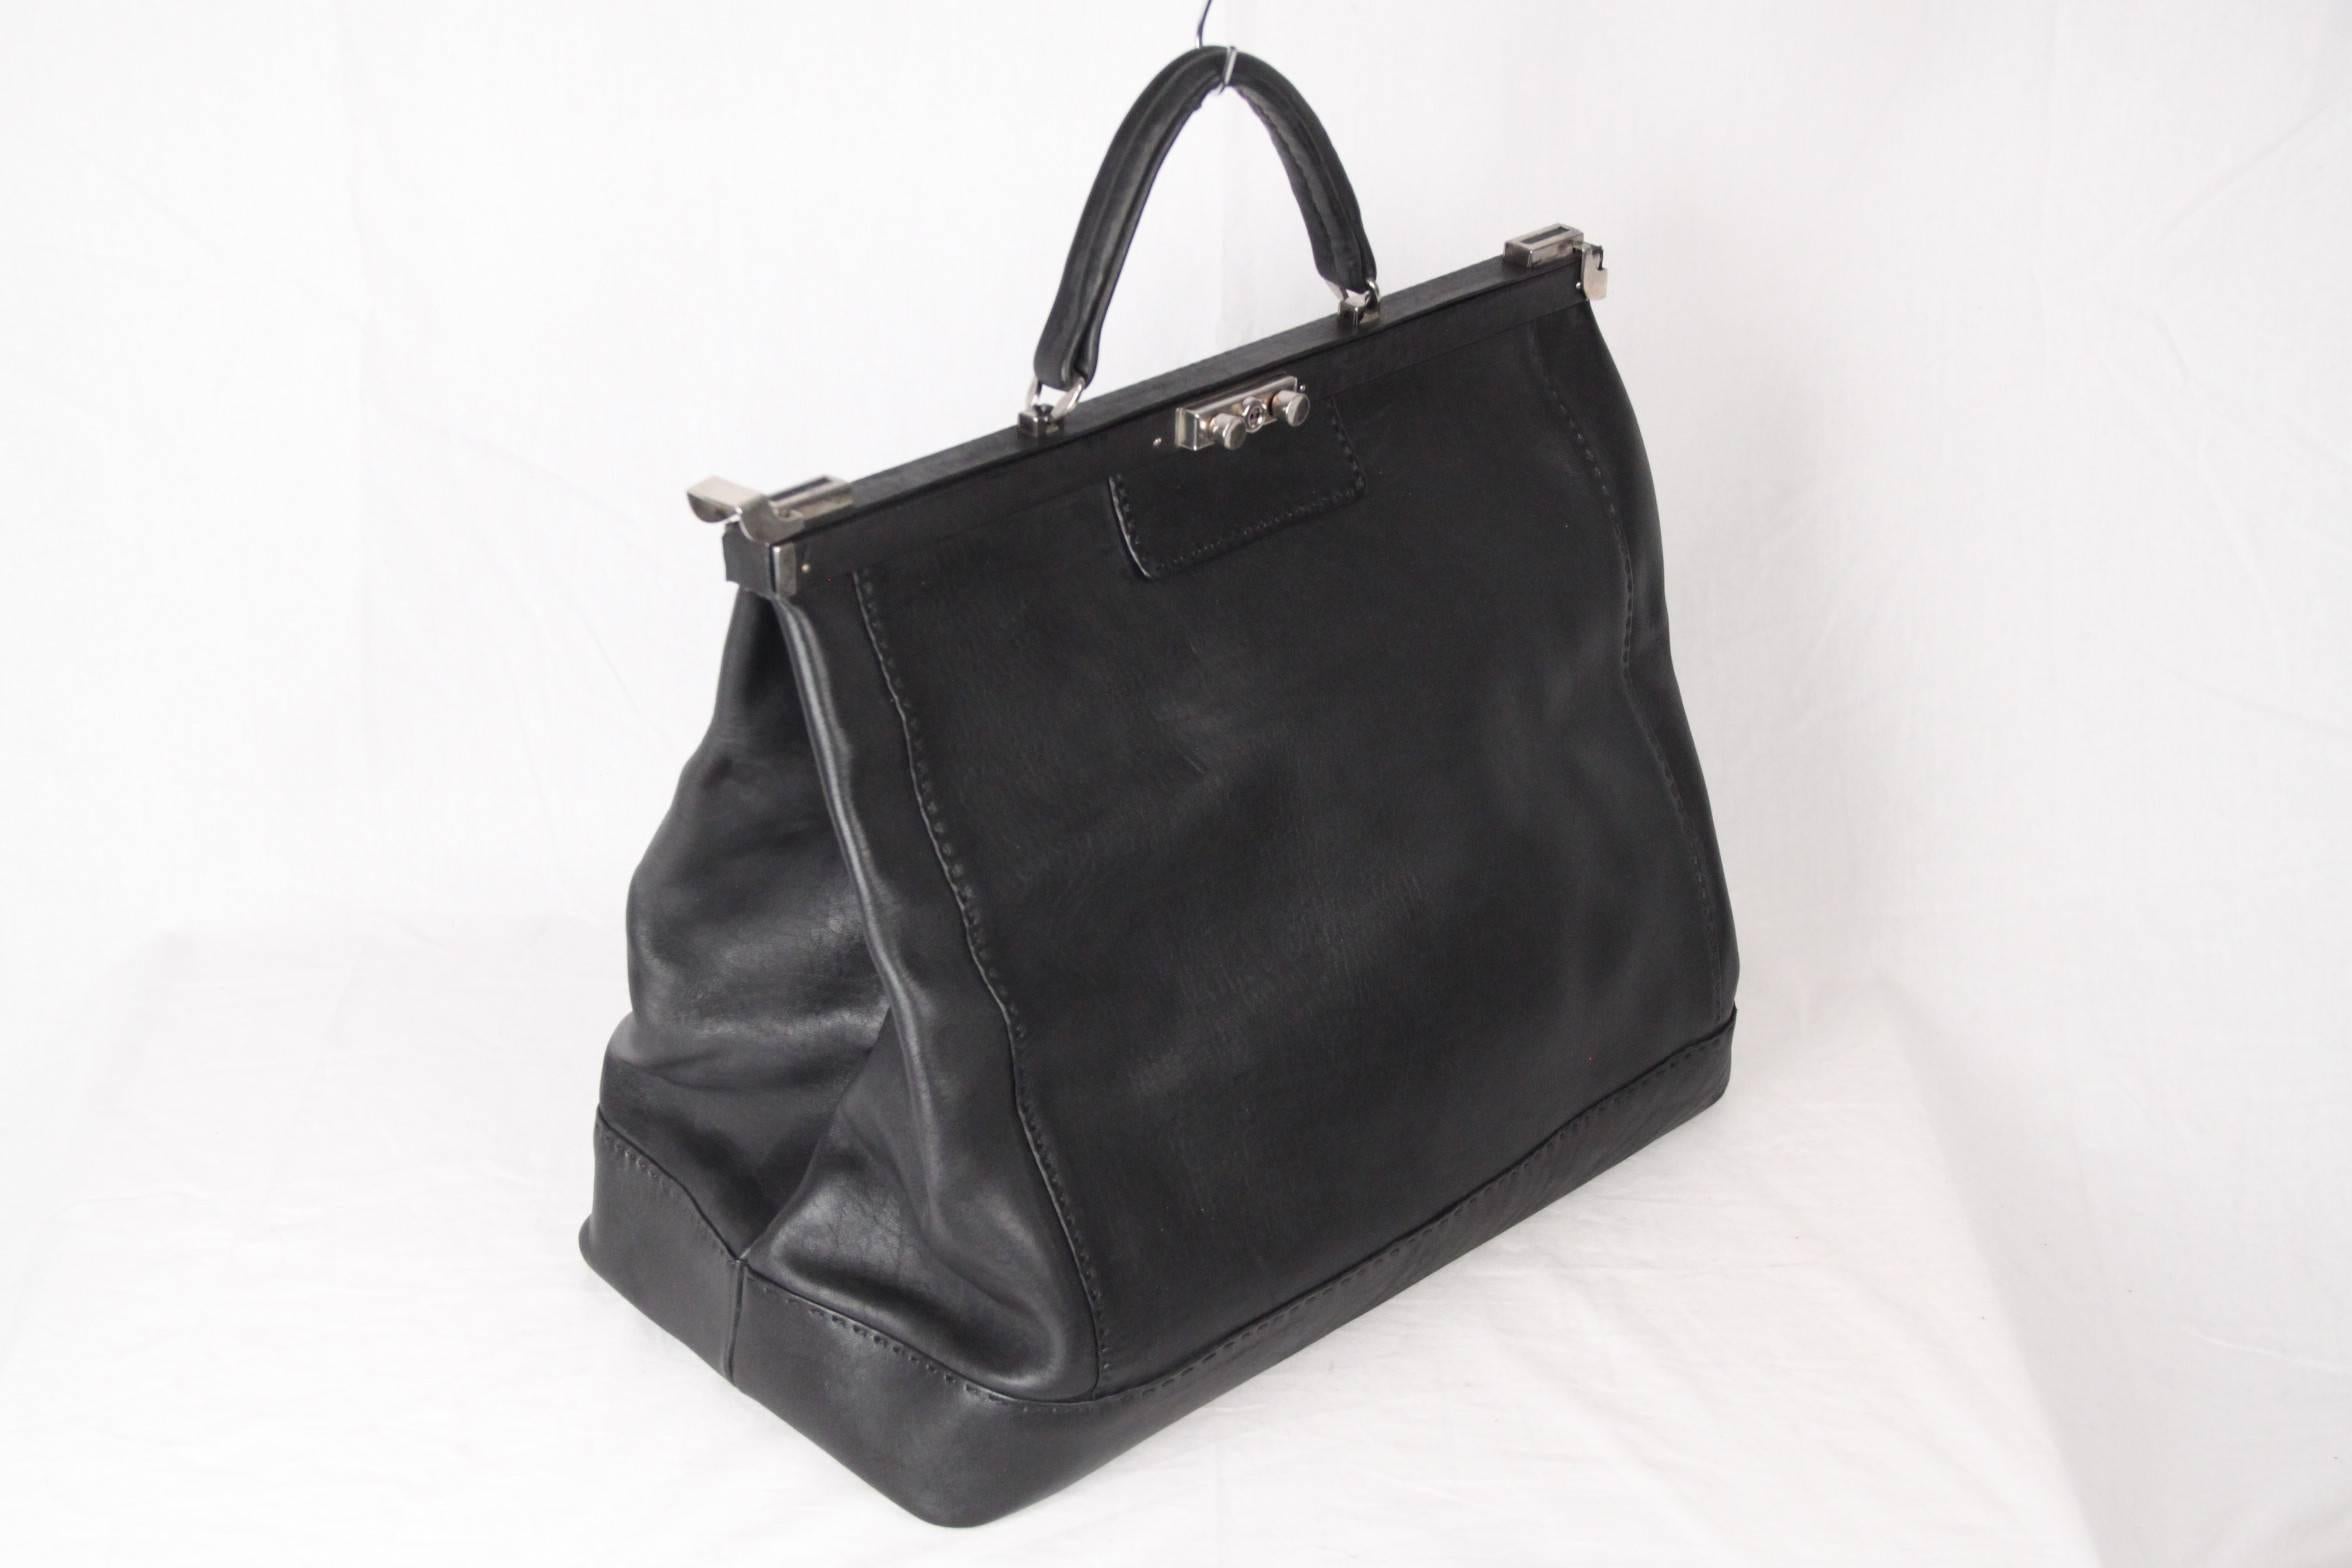 Oversized doctor bag,  weekender, carry on, or overnight tote bag, made in black genuine leather.  Framed top with lock closure on the front and side closures. Protective bottom feet. Inside, the bag has a removable pouch that can be which can also